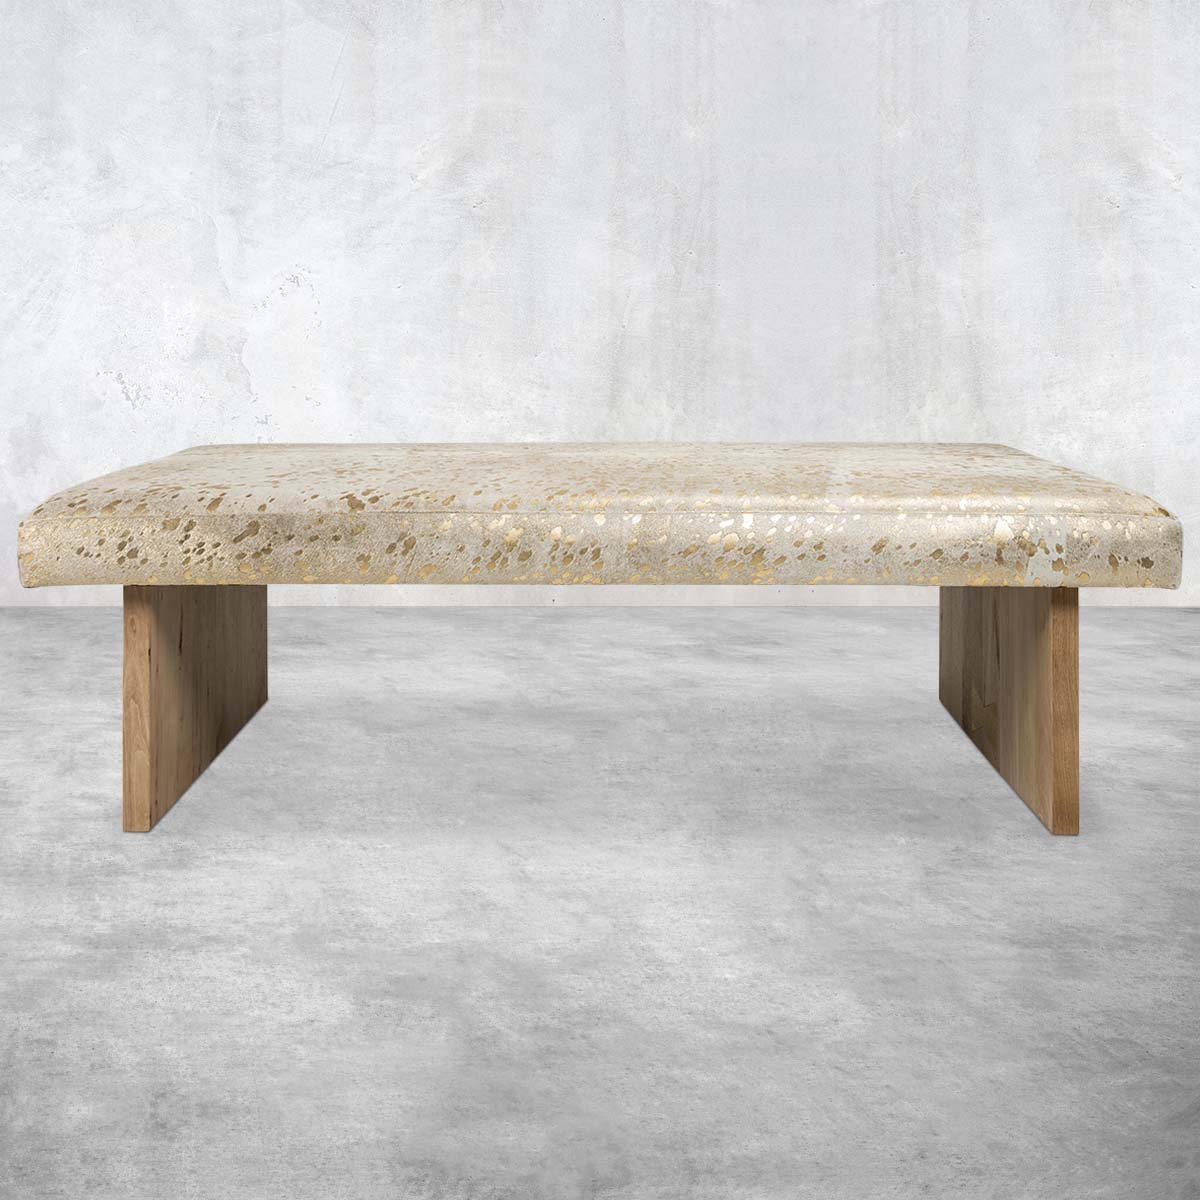 Bonanza Bench in Gold Speckled Foil with Natural Cowhide